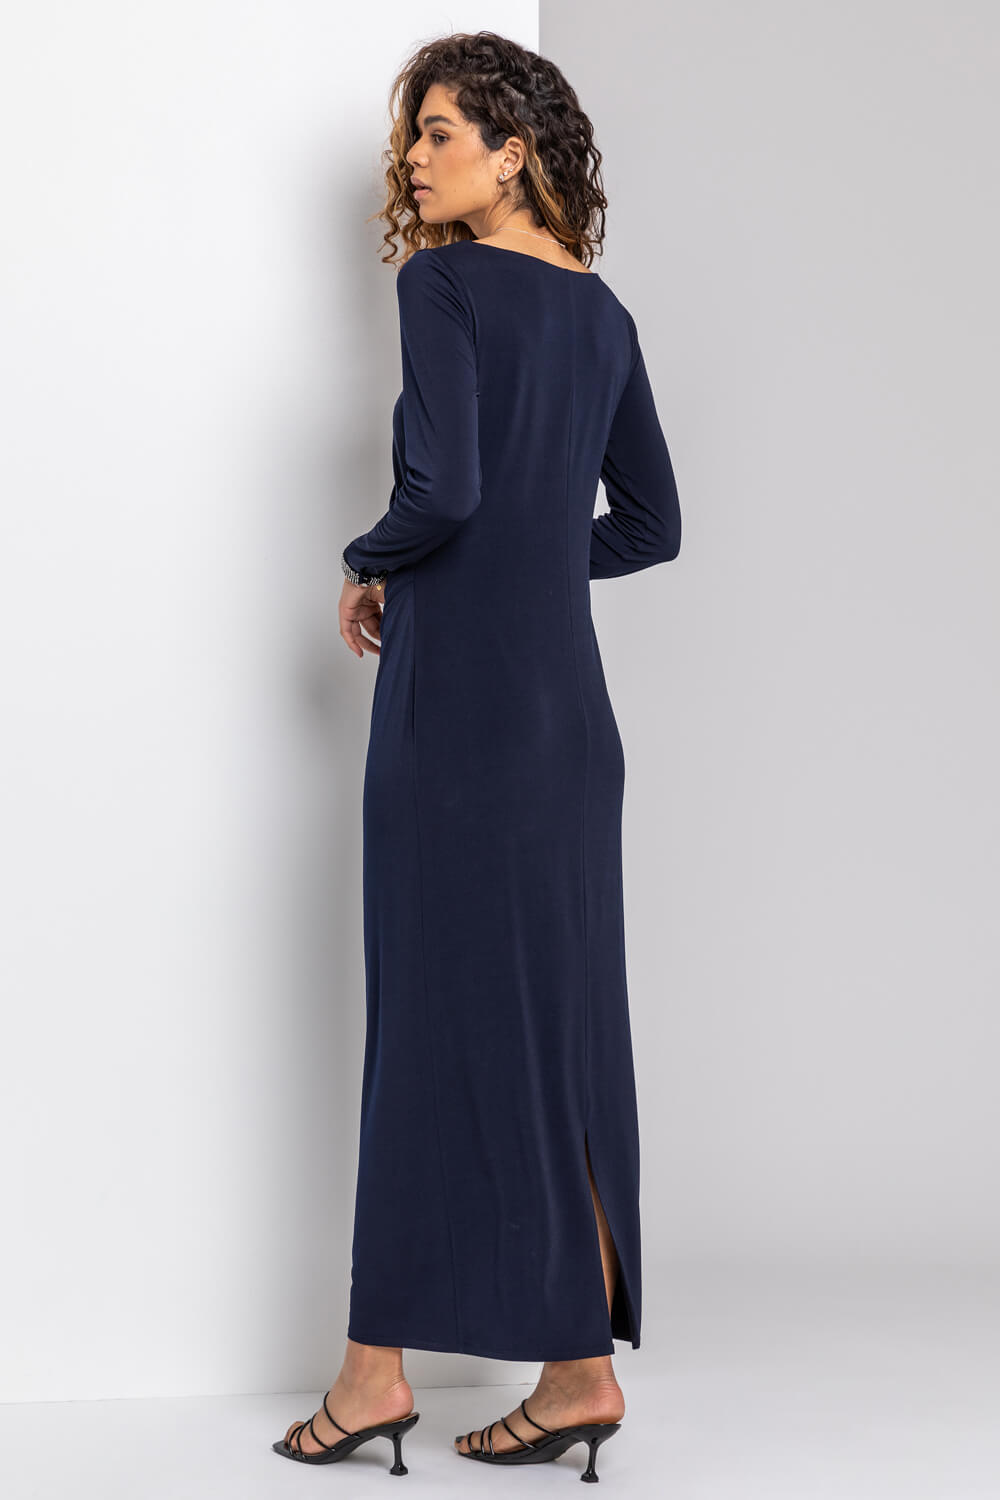 Midnight Blue Sparkle Embellished Ruched Maxi Dress, Image 2 of 4